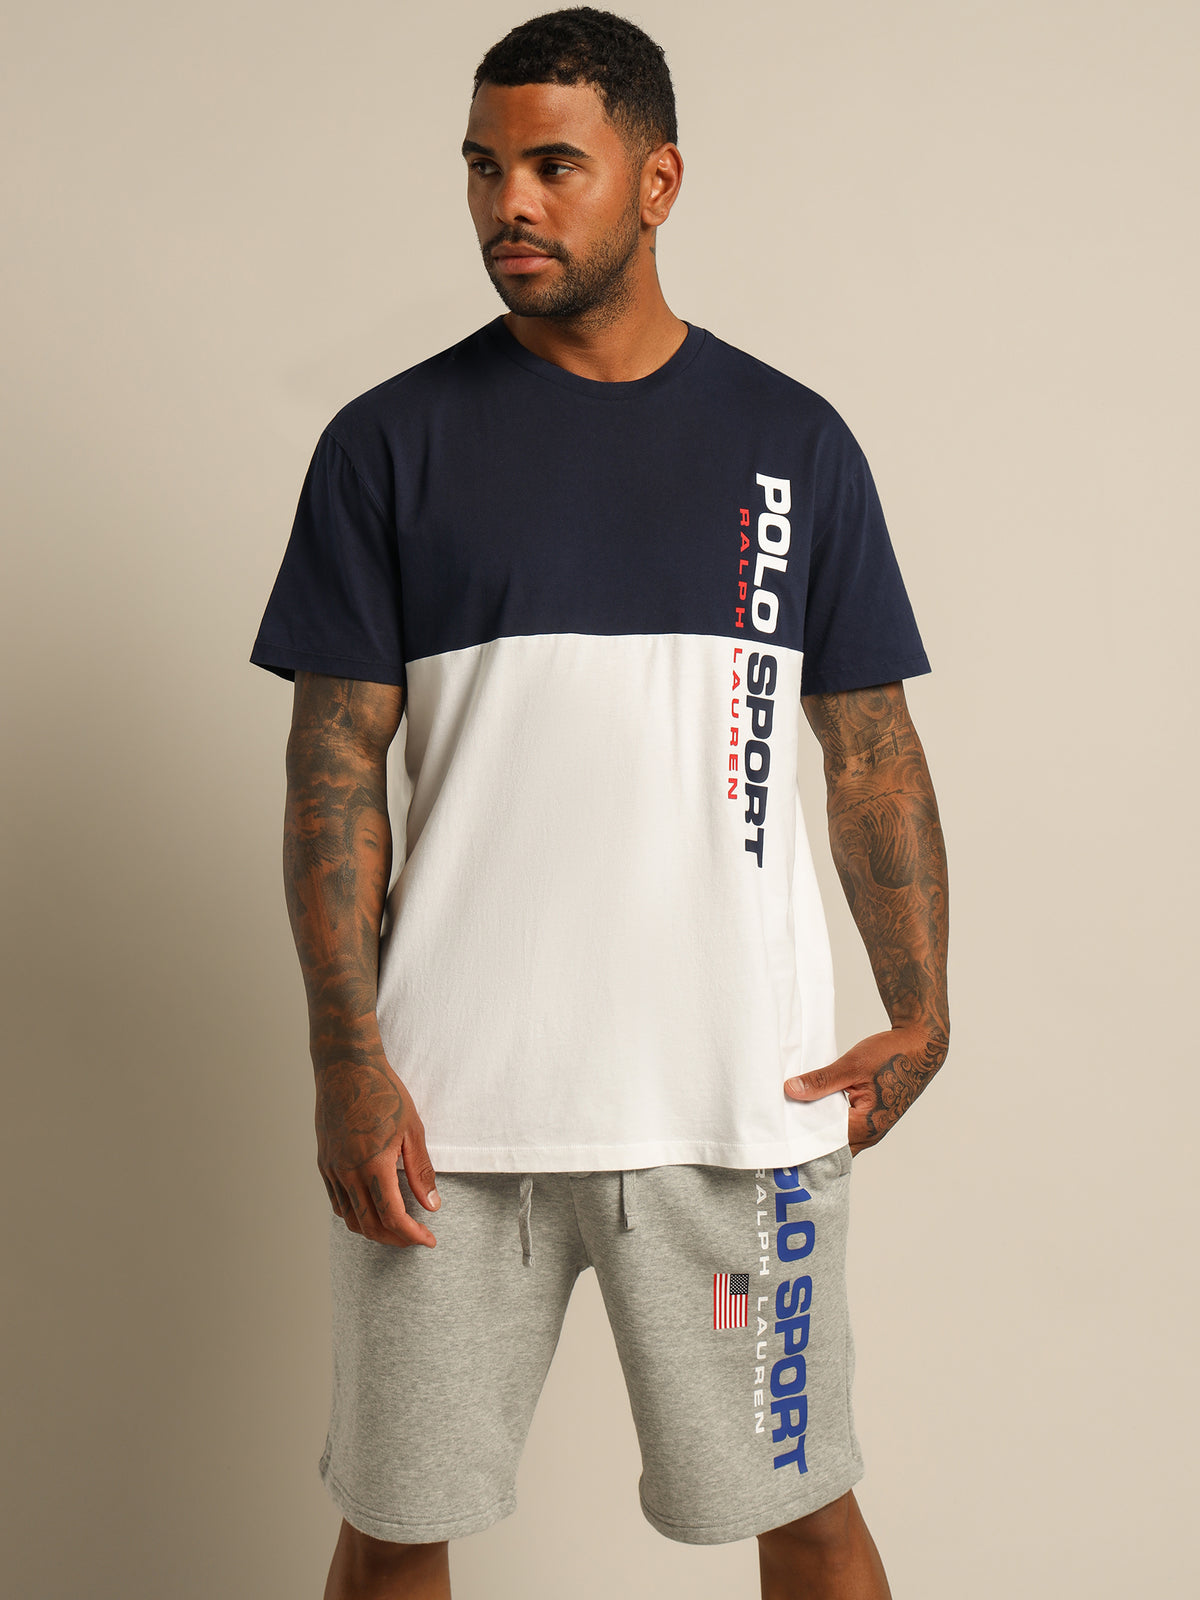 Polo Sport T-Shirt in Navy